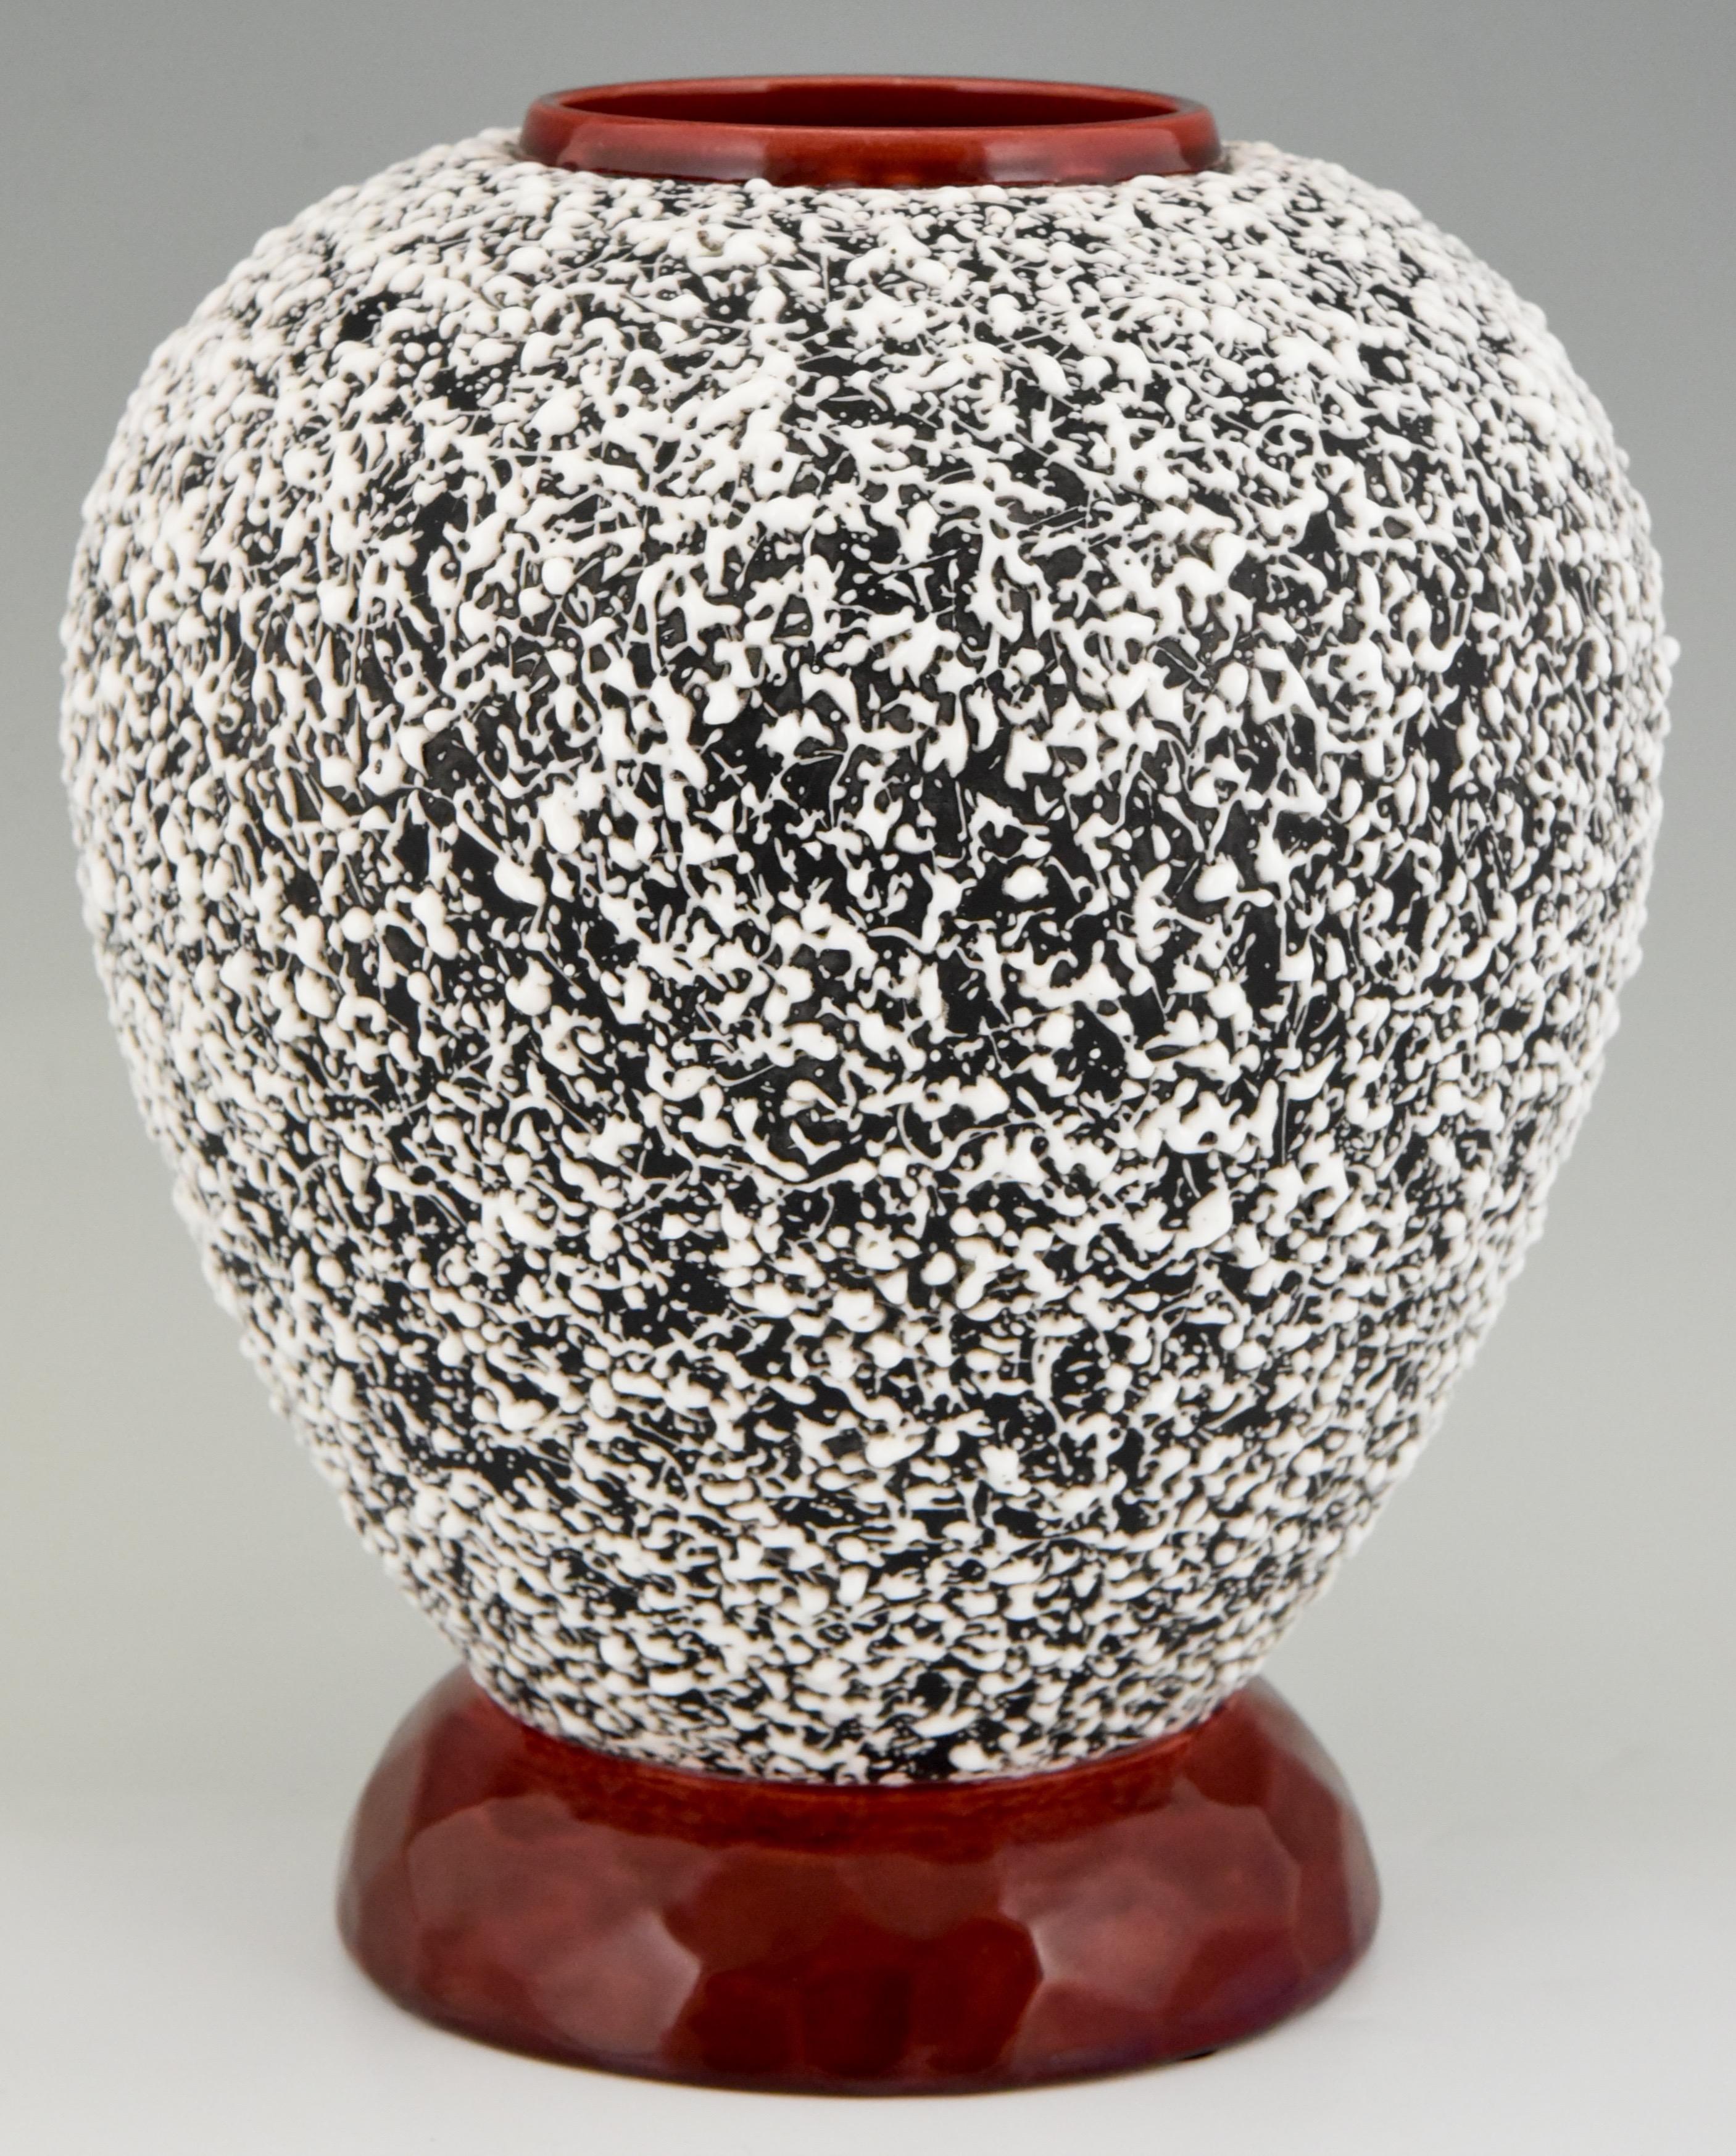 Art Deco globular ceramic vase anthracite grey surface with white textured glaze, oxblood rim and foot. 
Design by Paul Milet for Sèvres, France, 1930.

Literature:
“The Encyclopedia of Decorative Arts 1890-1940” by Philippe Garner. ?“Art Deco